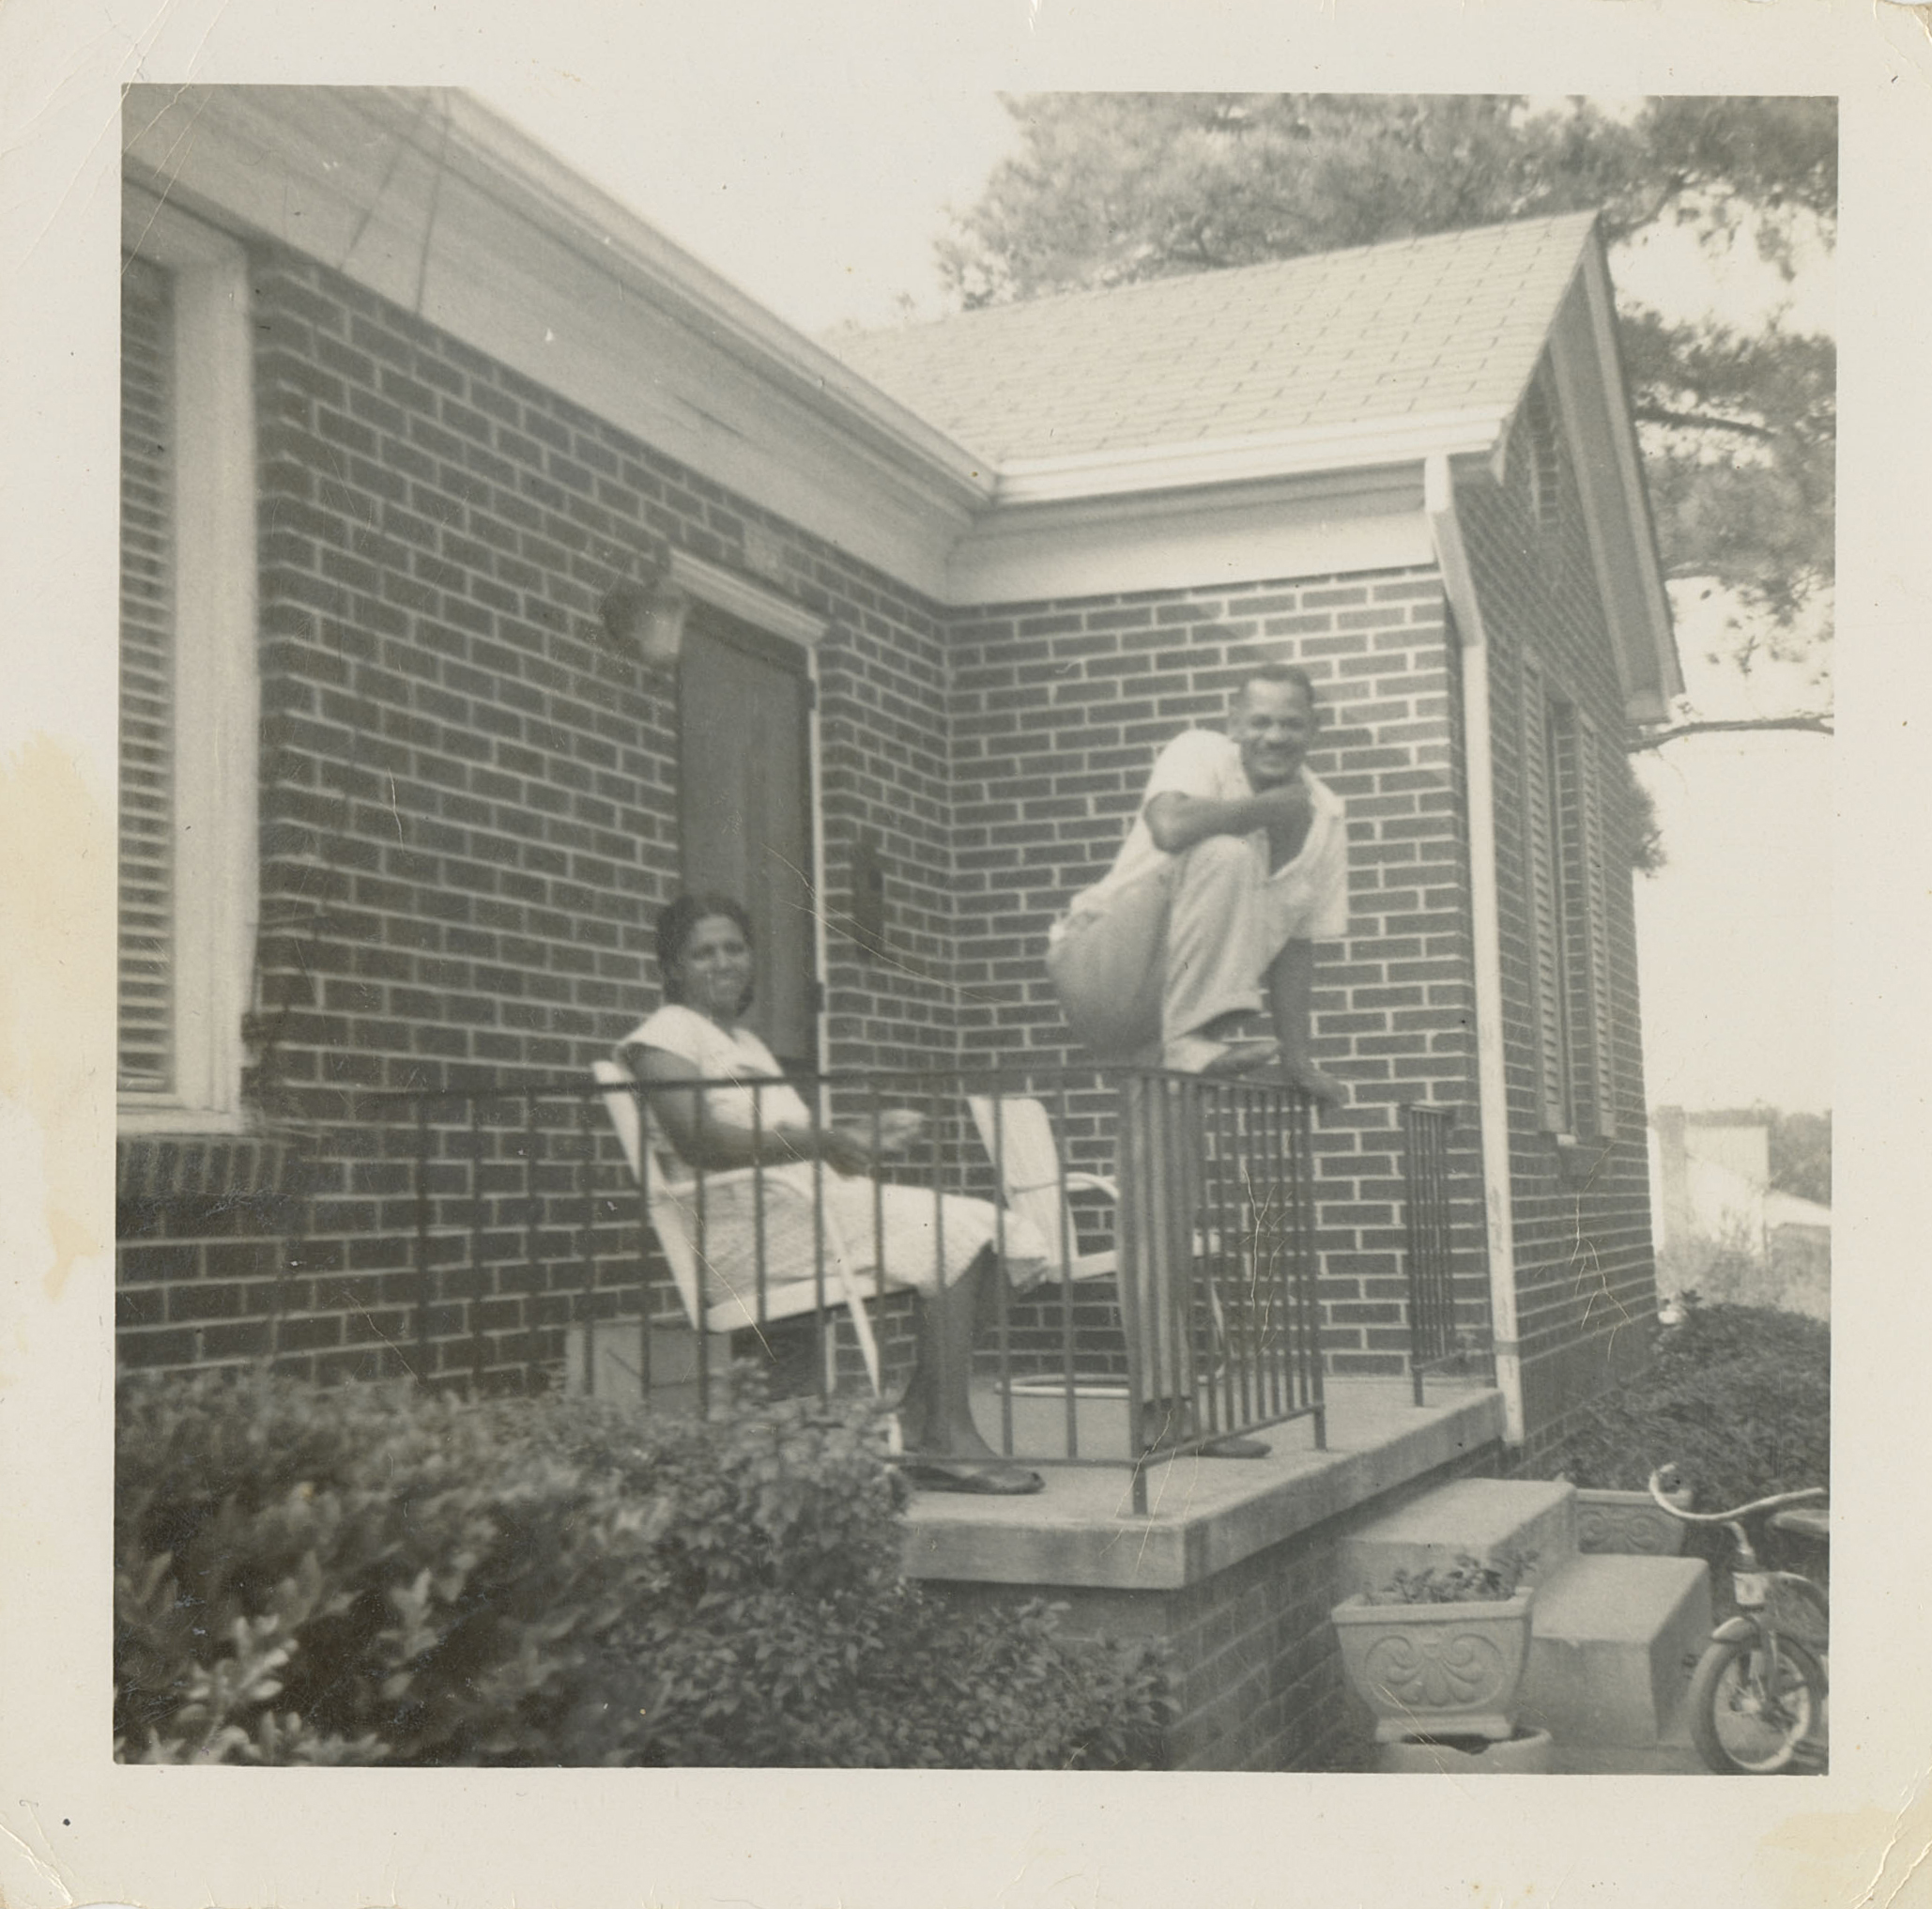 Ethel Bolden and her husband relax on the front porch of their Columbia, South Carolina home